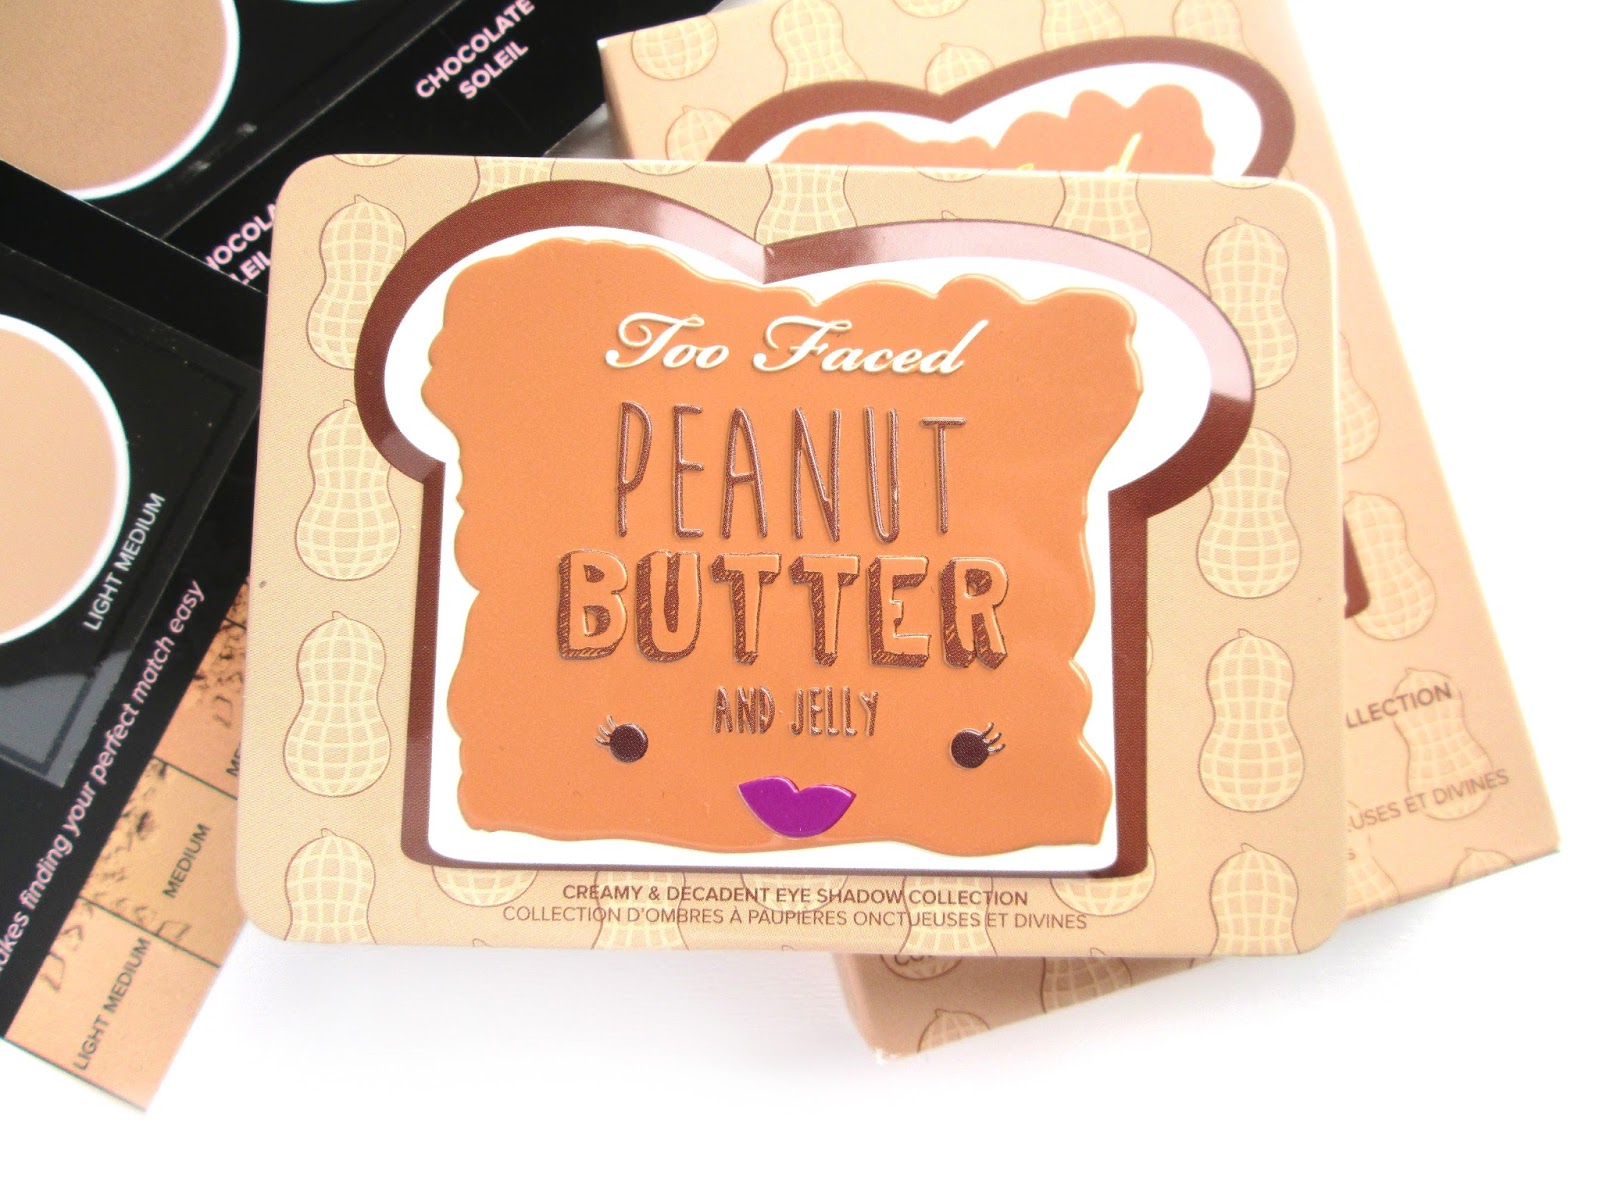 Too Faced Peanut Butter & Jelly Palette Review